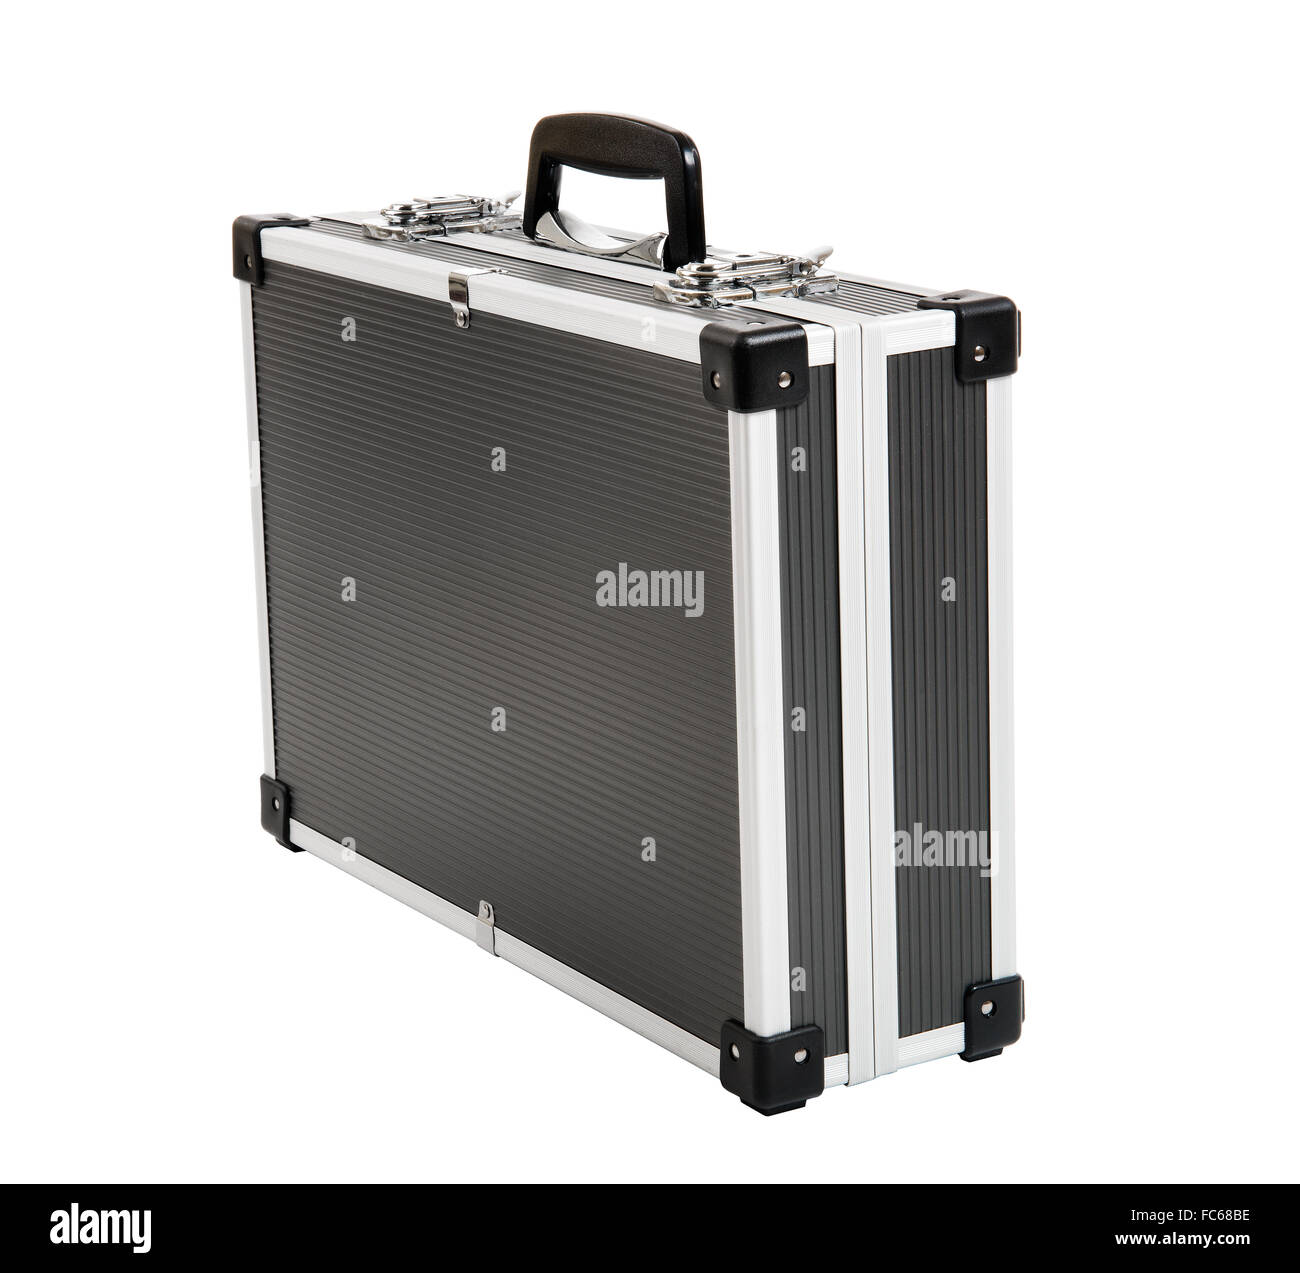 Aluminium suitcase hires stock photography and images Alamy